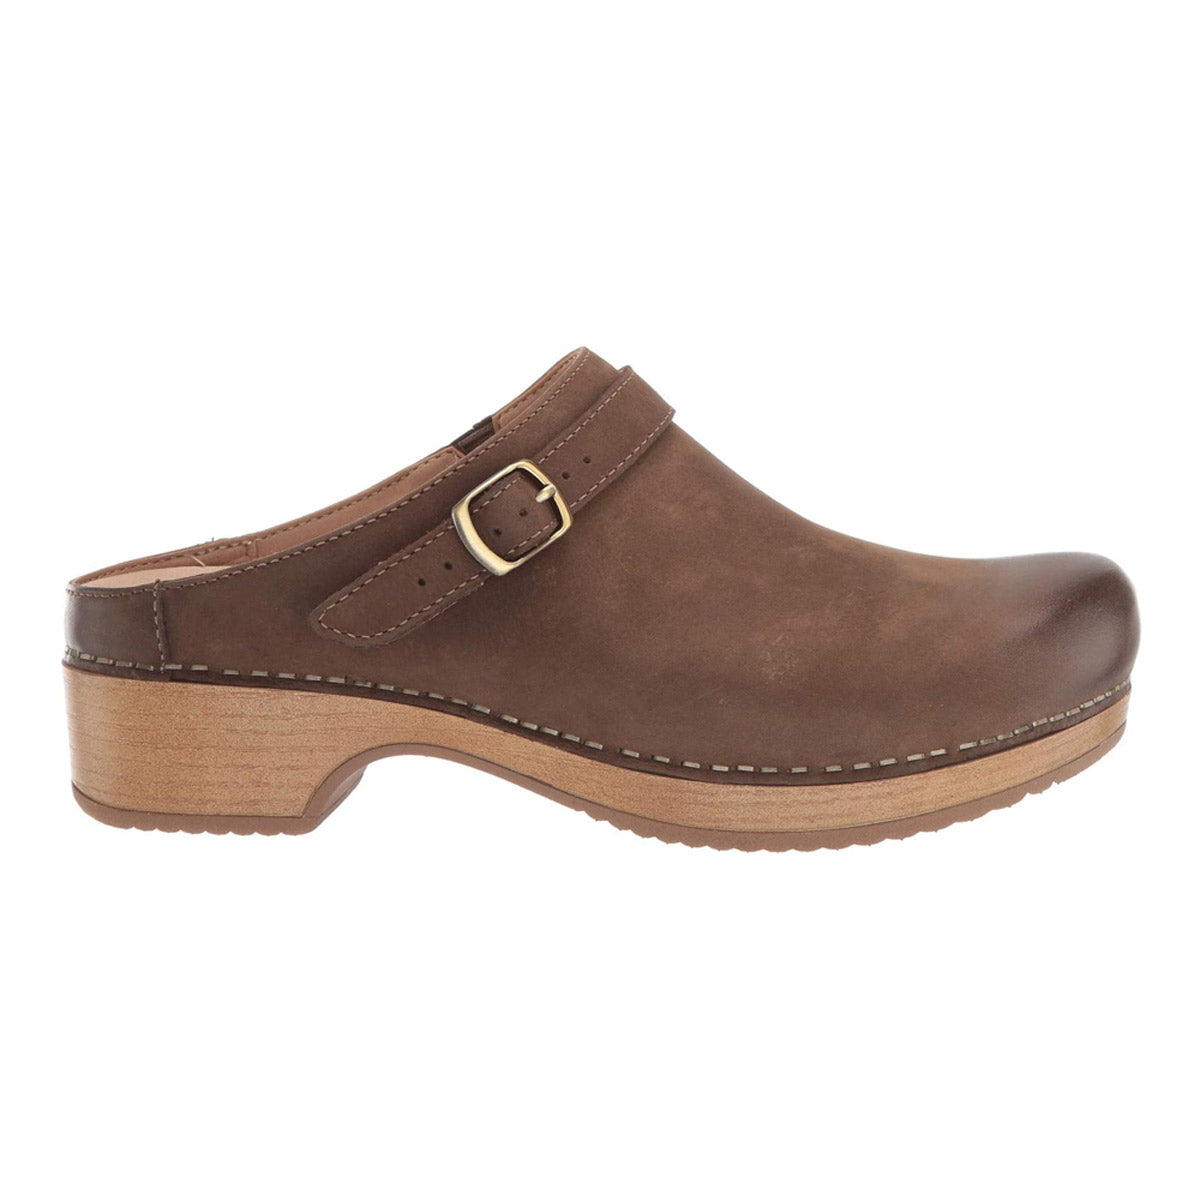 Brown Dansko Berry Mushroom Burnished clog with buckle on a white background.